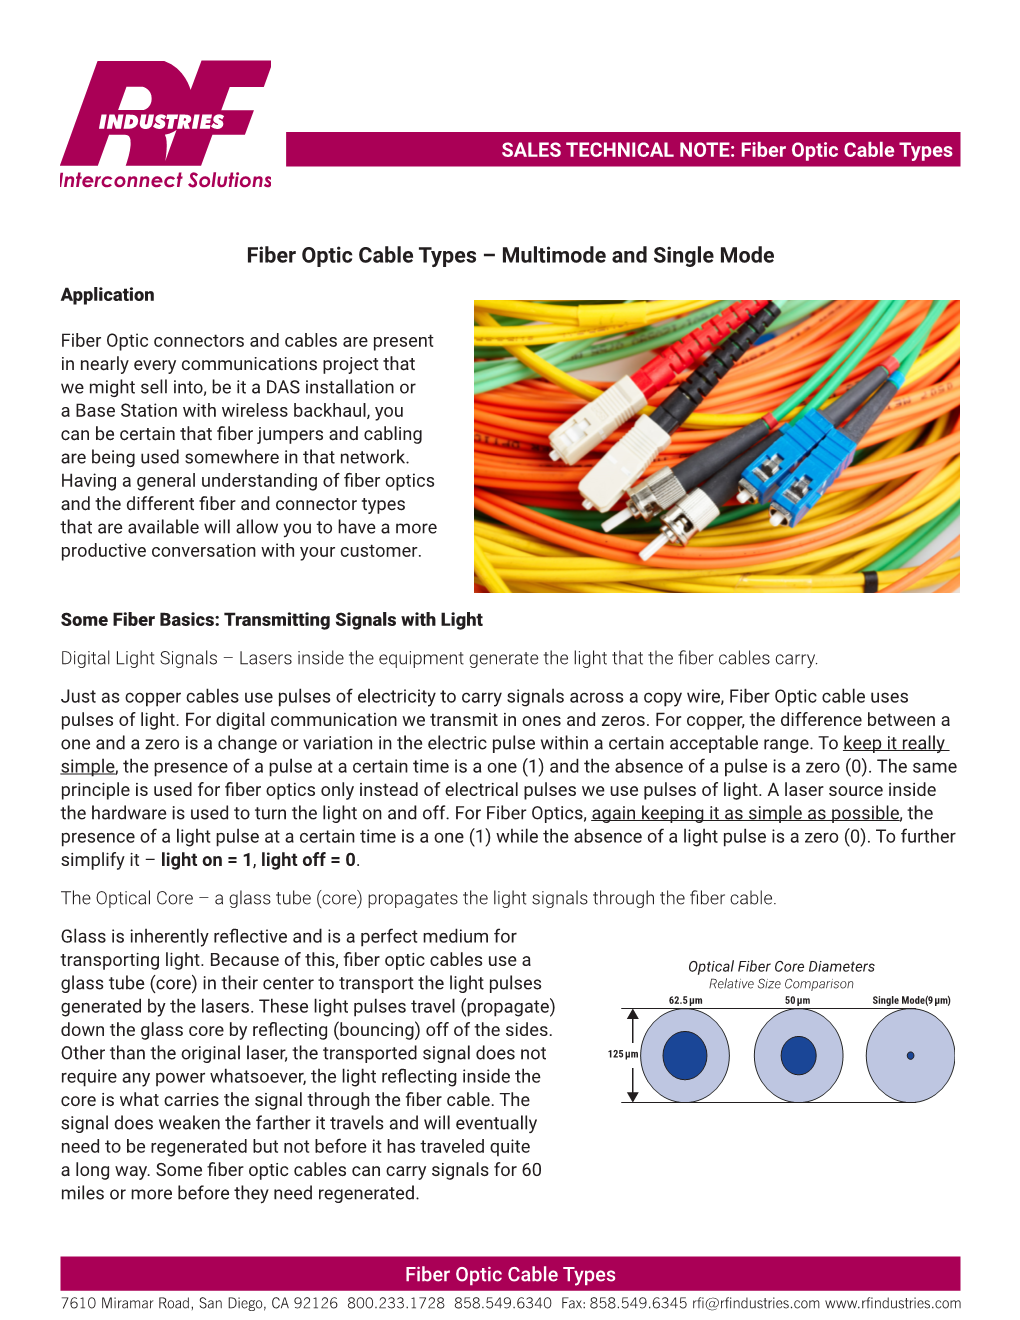 Fiber Optic Cable Types Interconnect Solutions